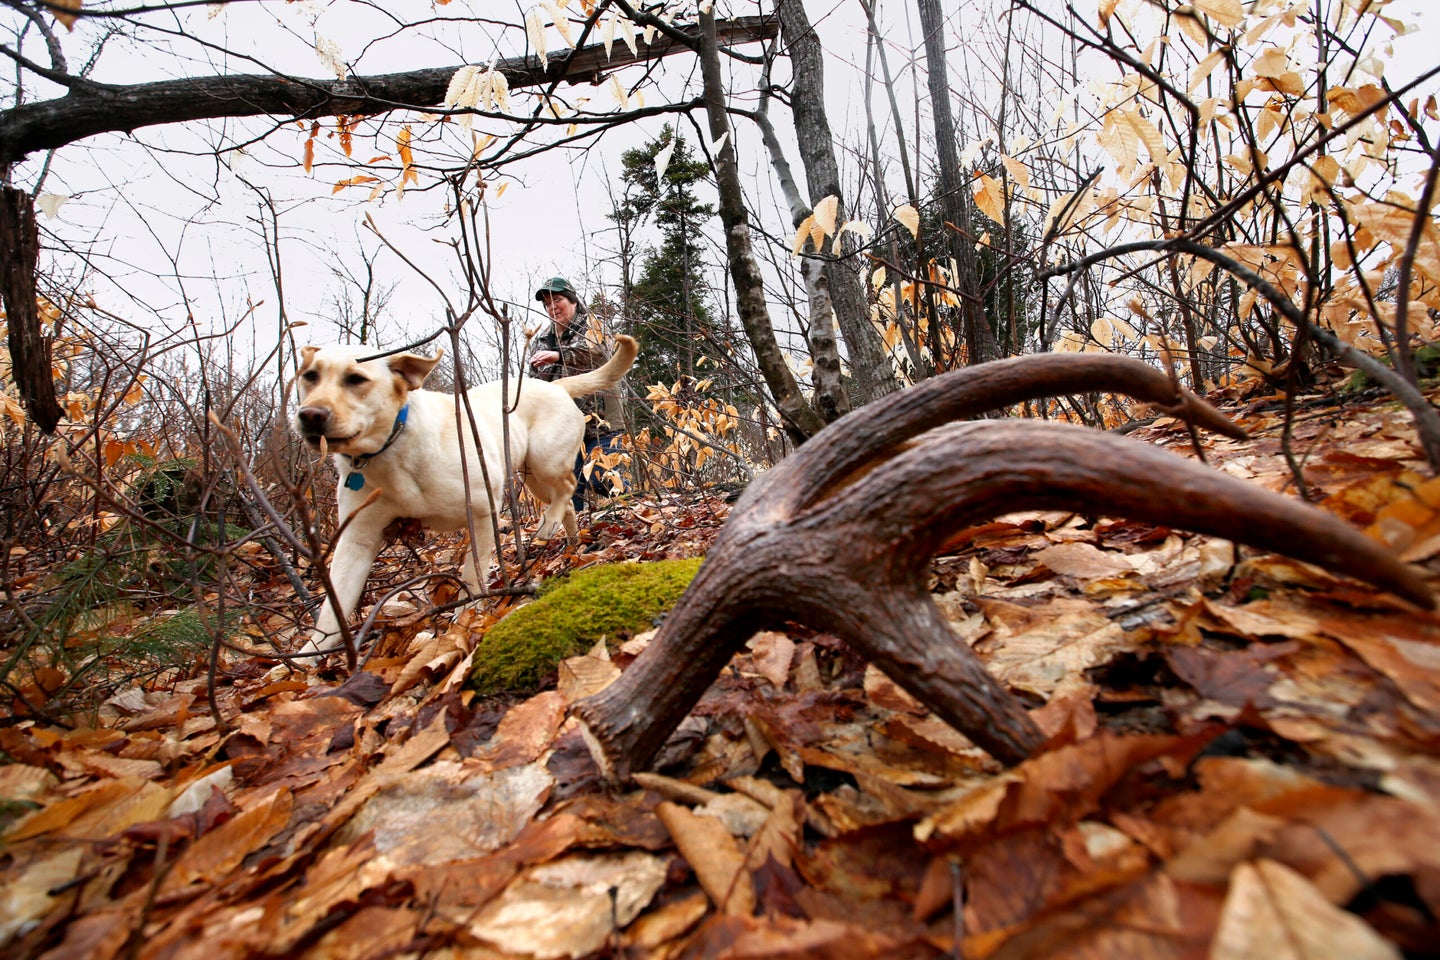 DEXTER, ME - APRIL 27: Luci, a 9-month-old yellow Labrador retriever, searches for a moose antler (right foreground) that has been placed in the woods by her owner Deanna Page. Page, who collects moose and deer antlers that the animals naturally shed, is training the young dog to help her find them.